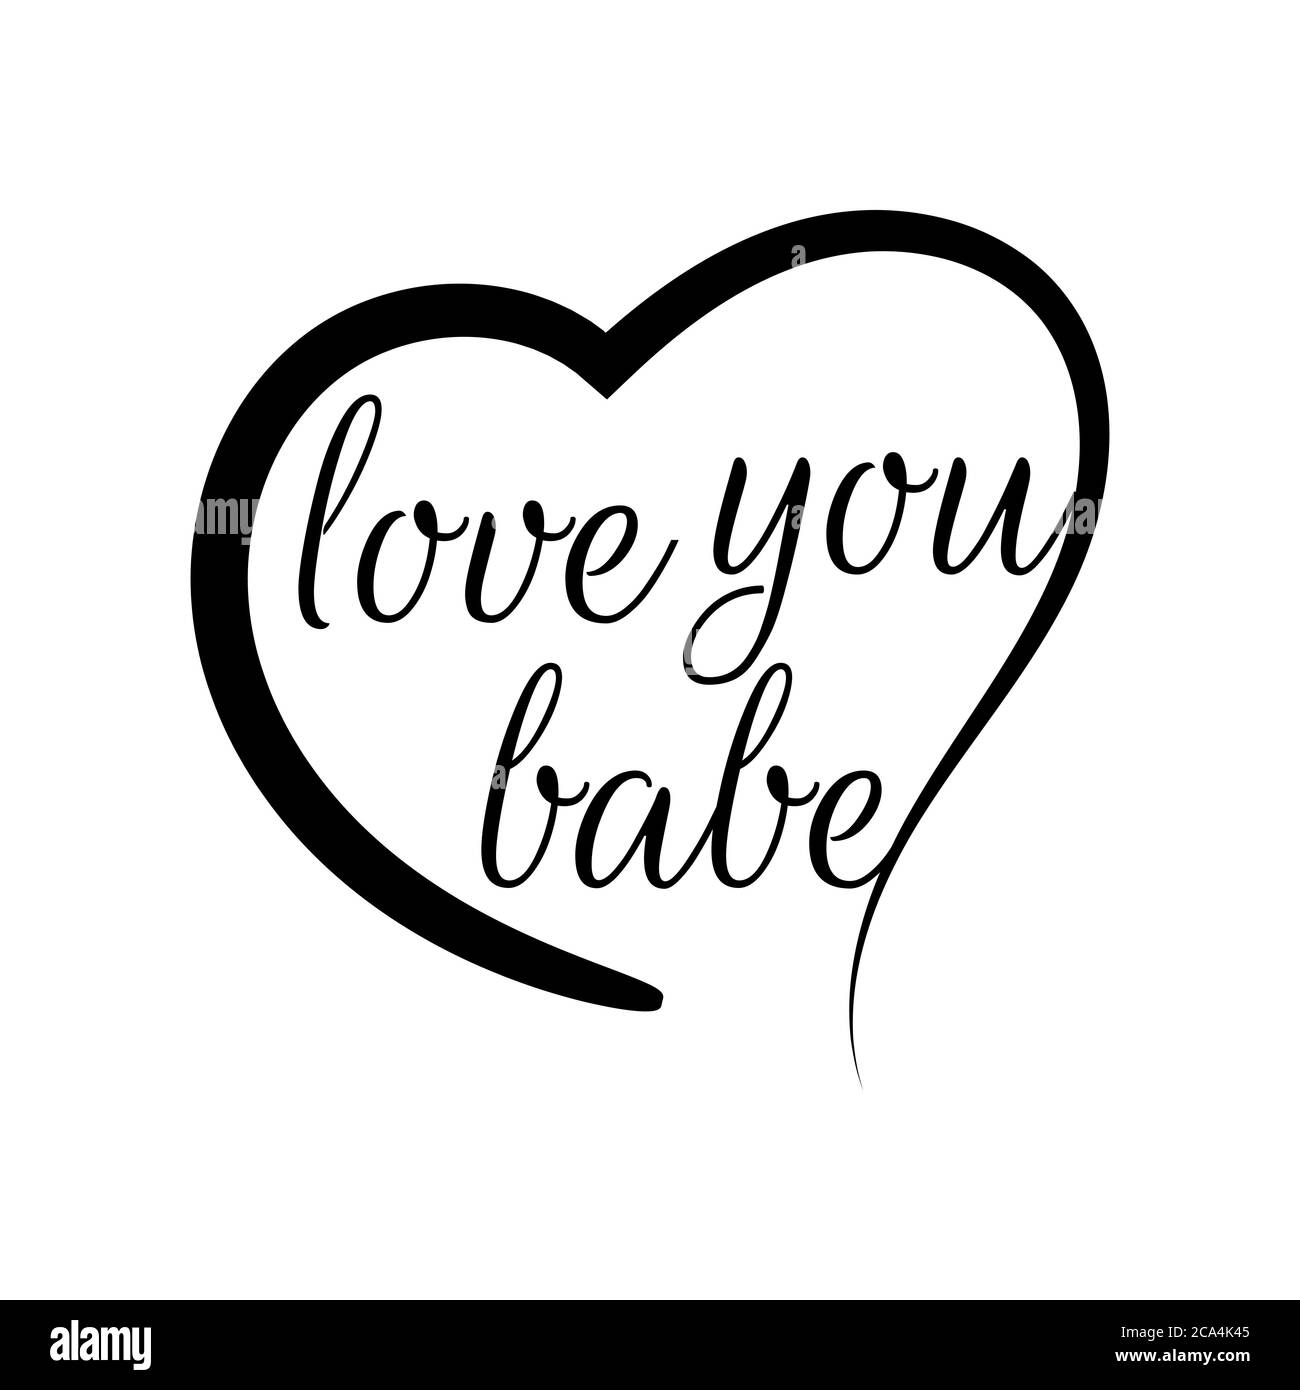 Love quotes Black and White Stock Photos & Images - Alamy